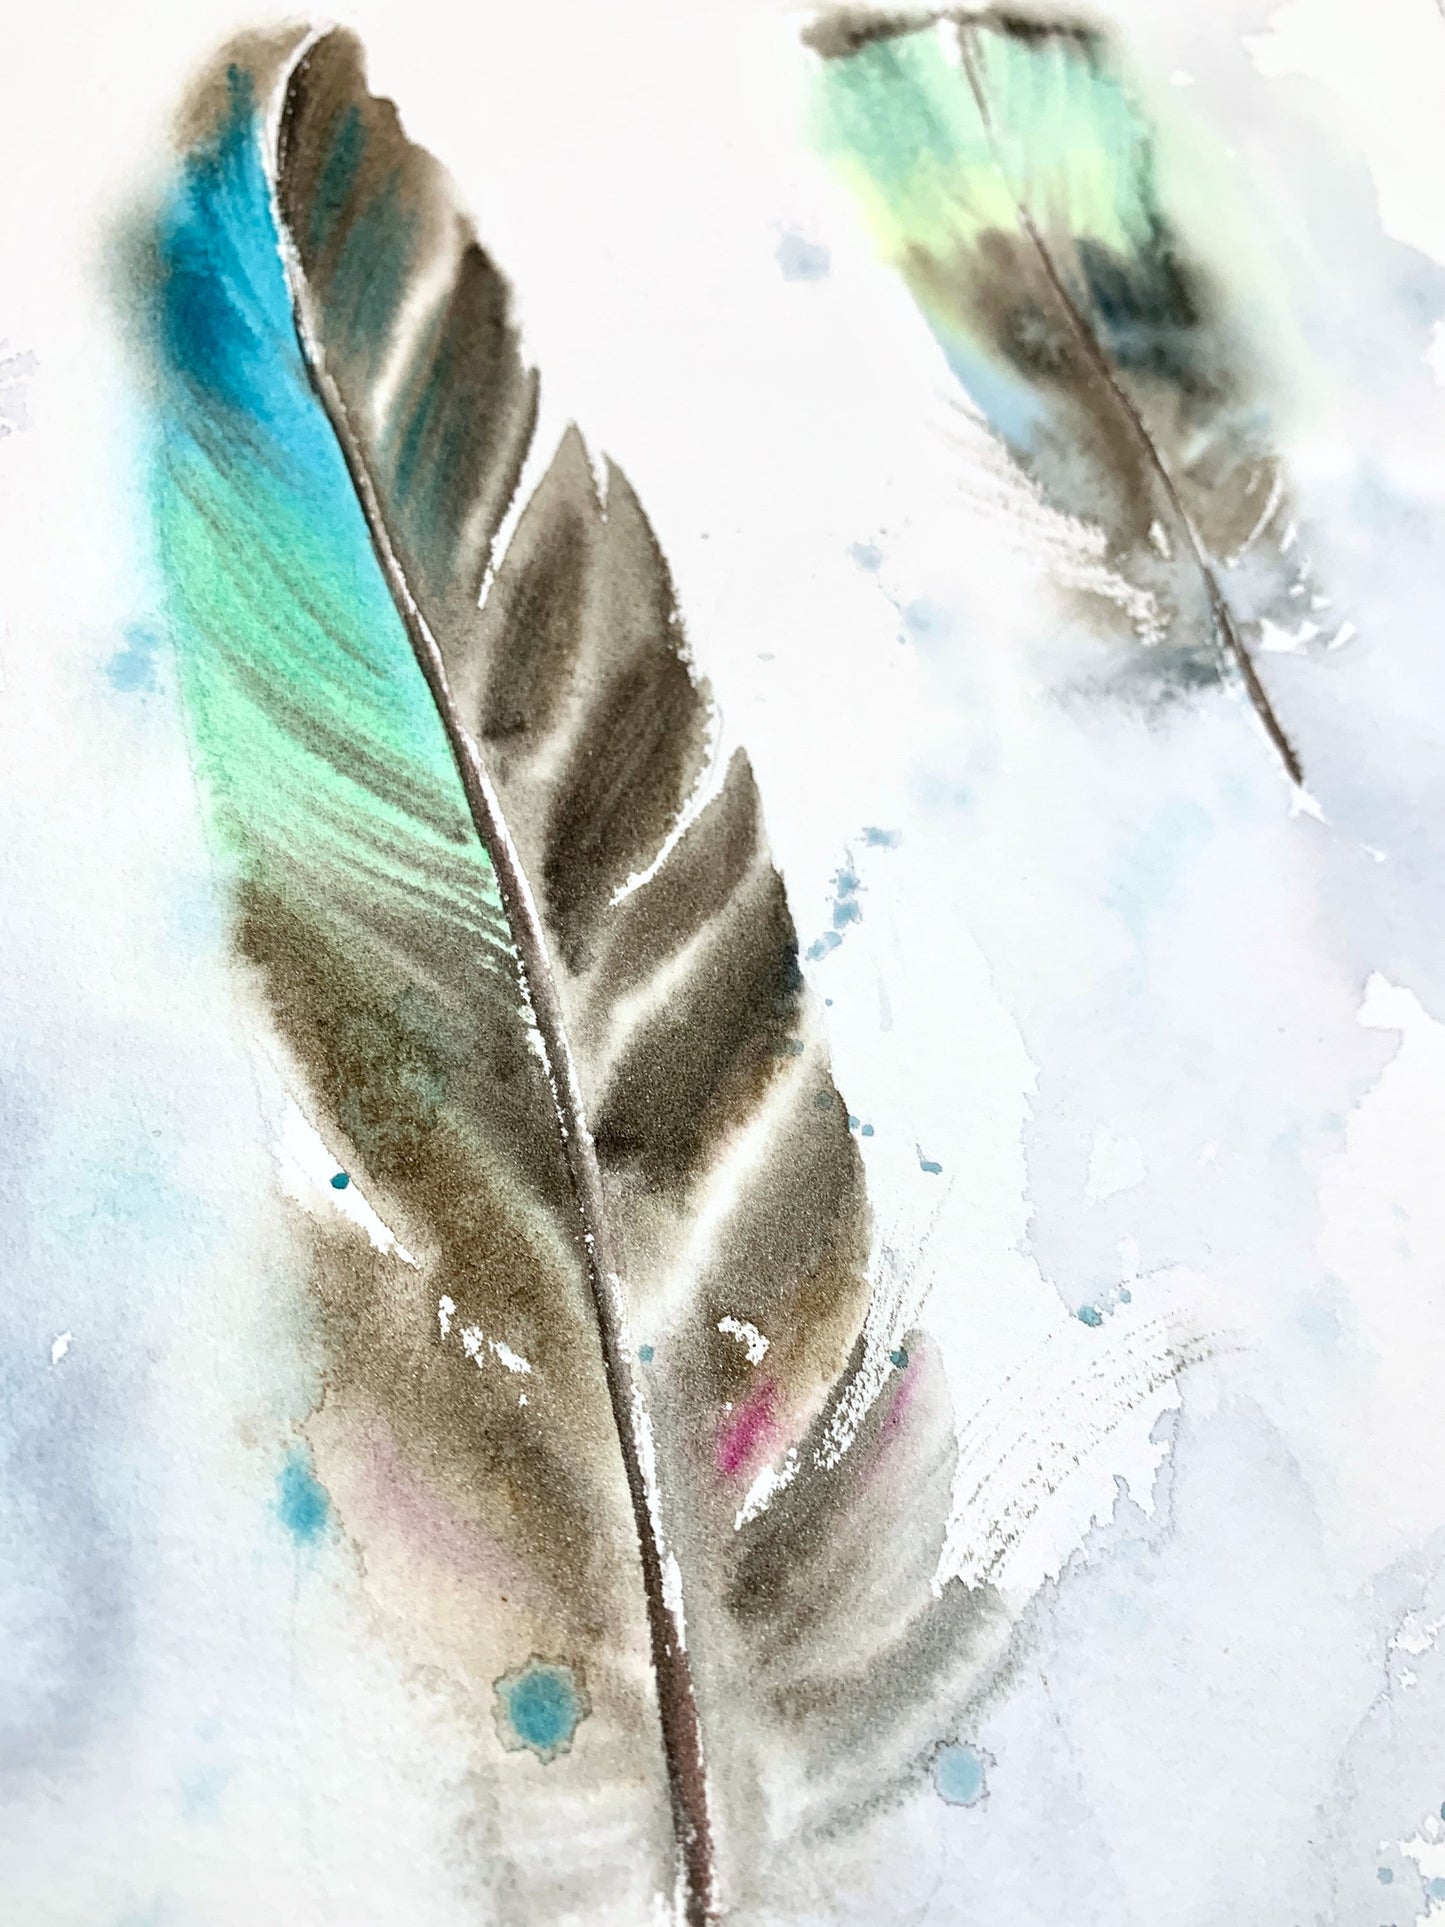 Gray Feather Painting Watercolor Original, Bird Art, Artwork for Gift, Wall Décoration | NOT A PRINT